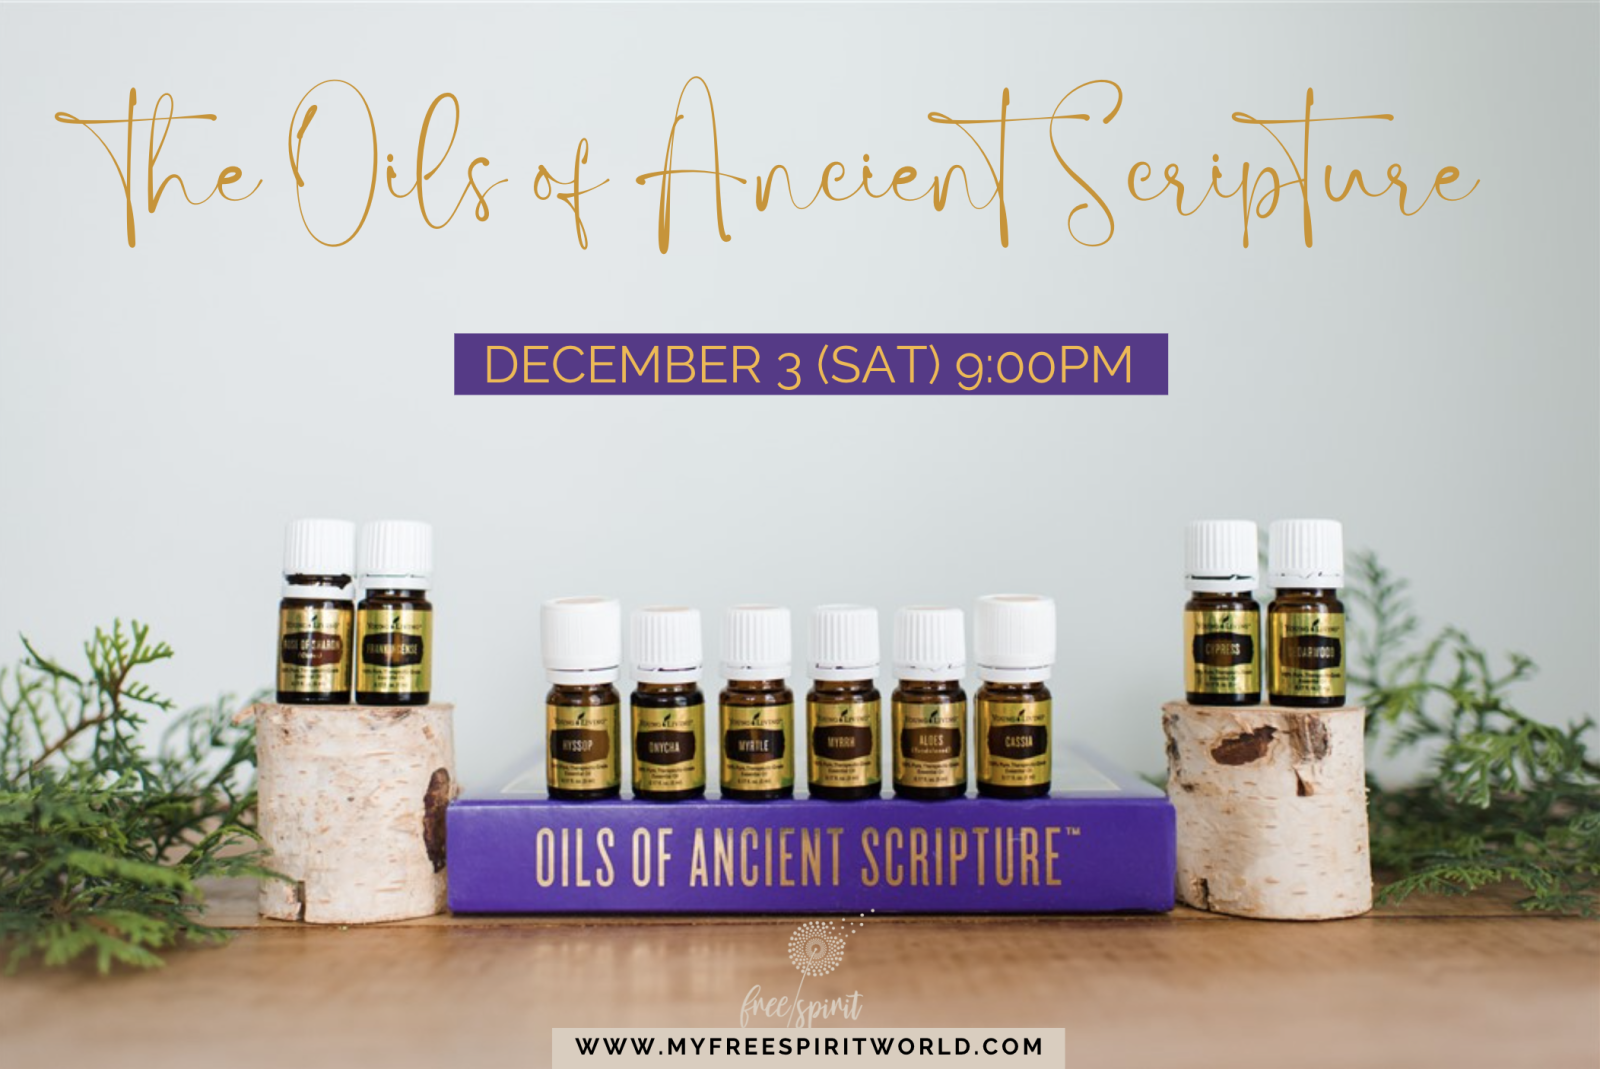 The Oils of Ancient Scripture